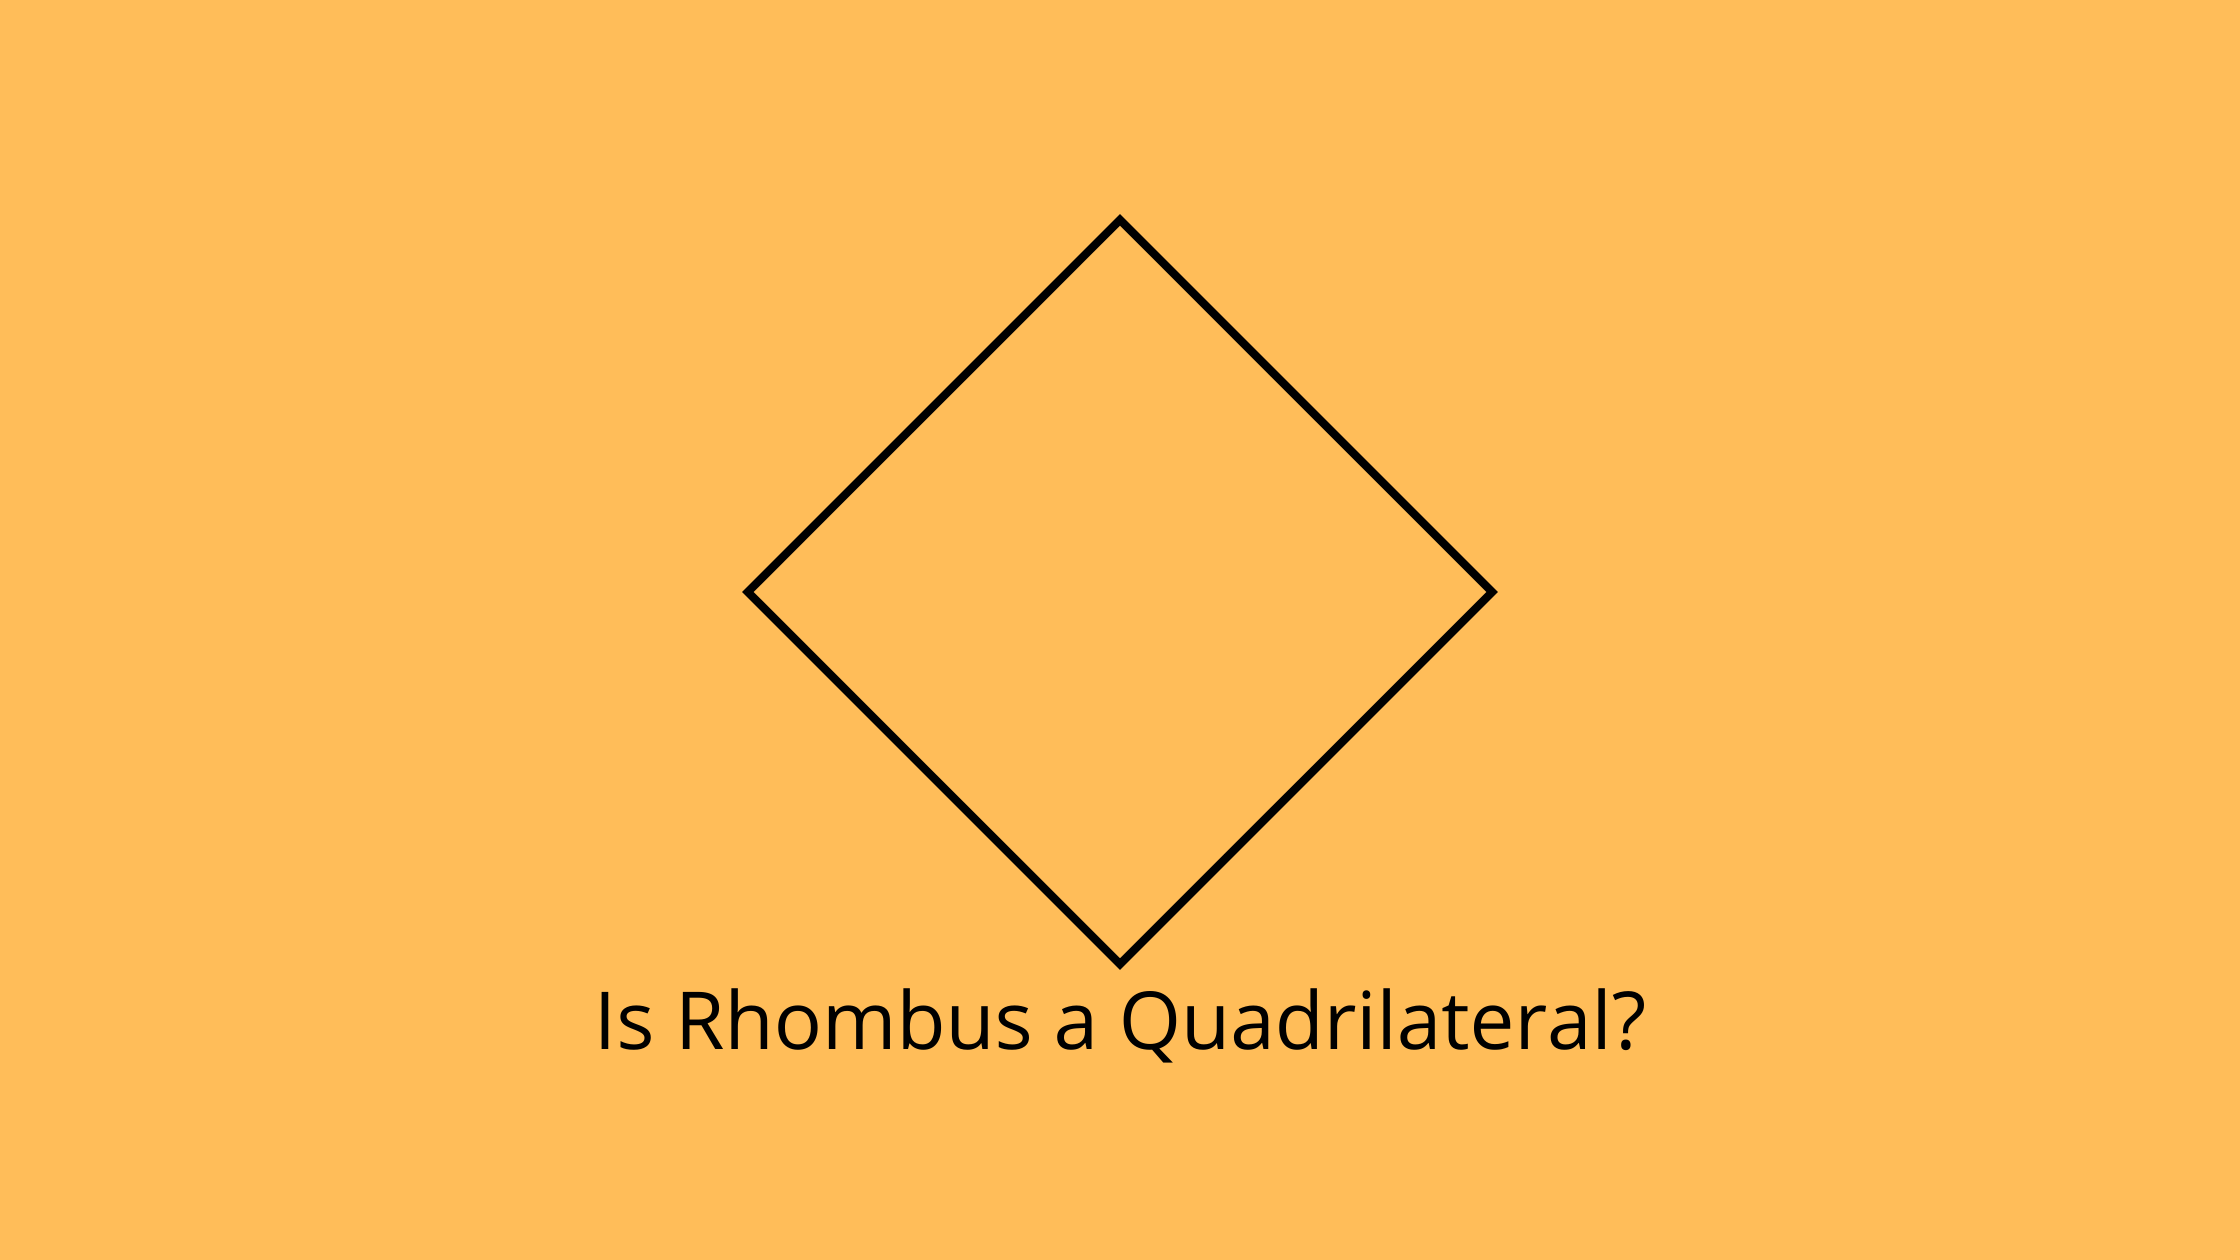 Is Rhombus a Quadrilateral?